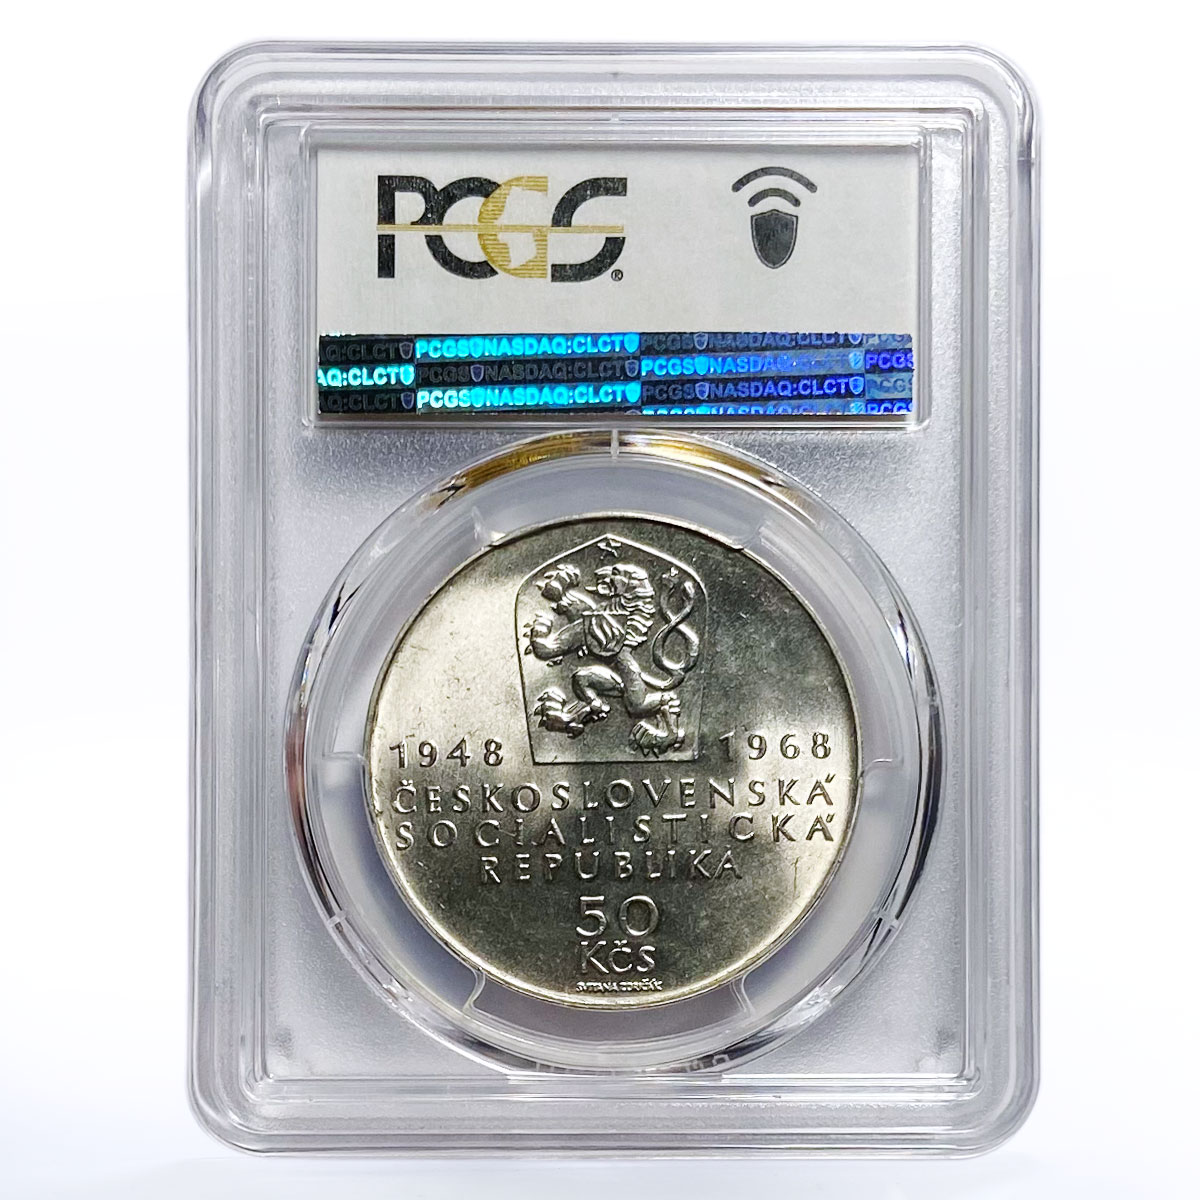 Czechoslovakia 50 korun 50th Jubilee of Independence MS64 PCGS silver coin 1968